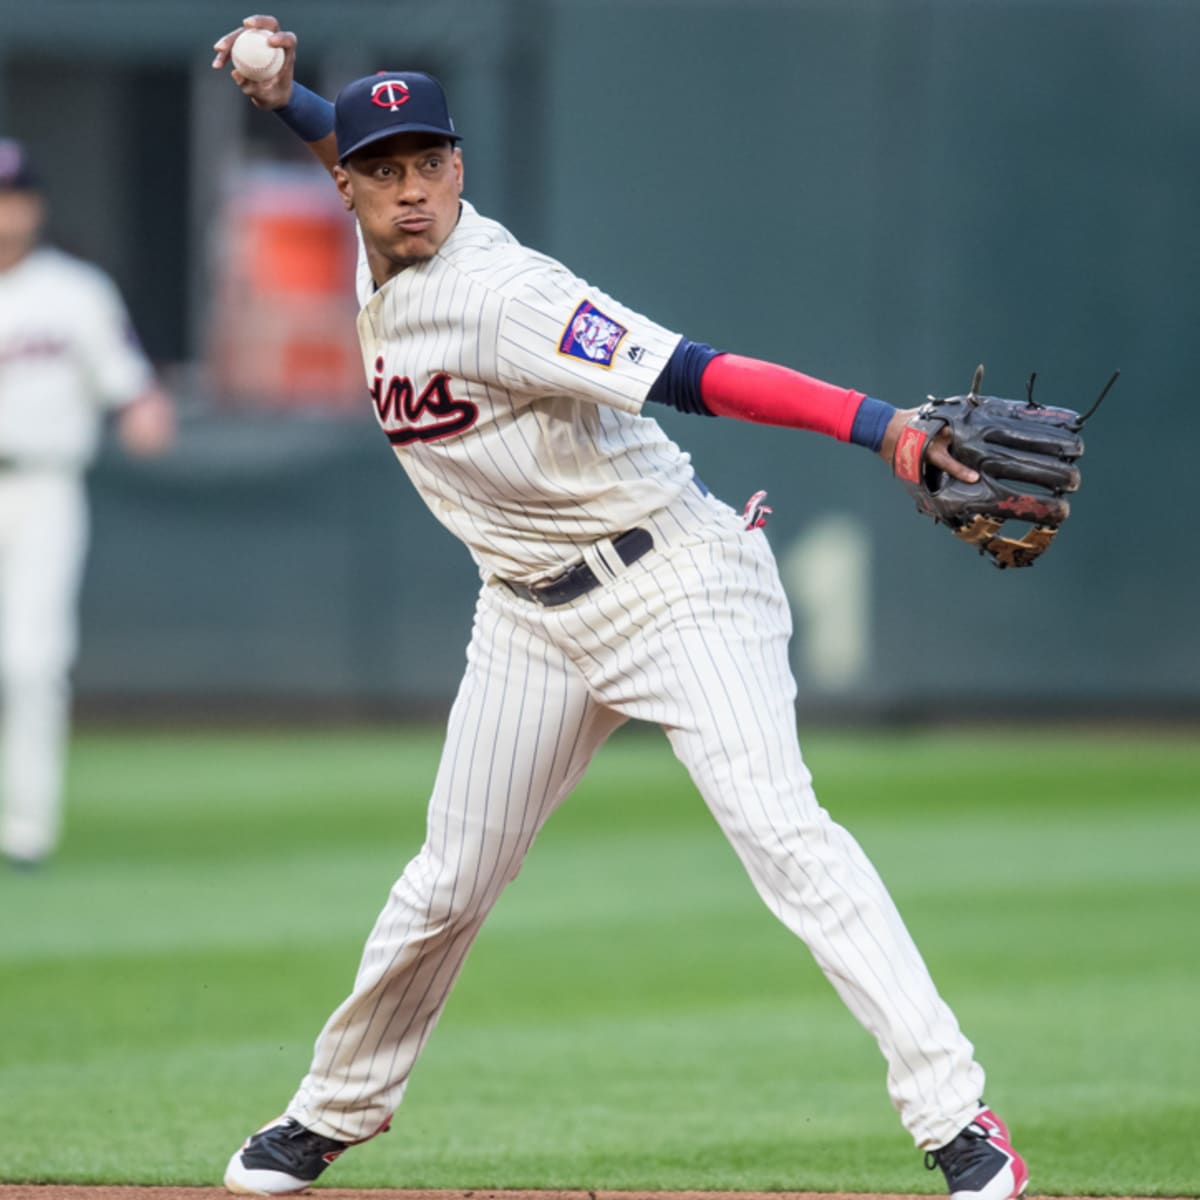 Twins working through loss of suspended shortstop Jorge Polanco